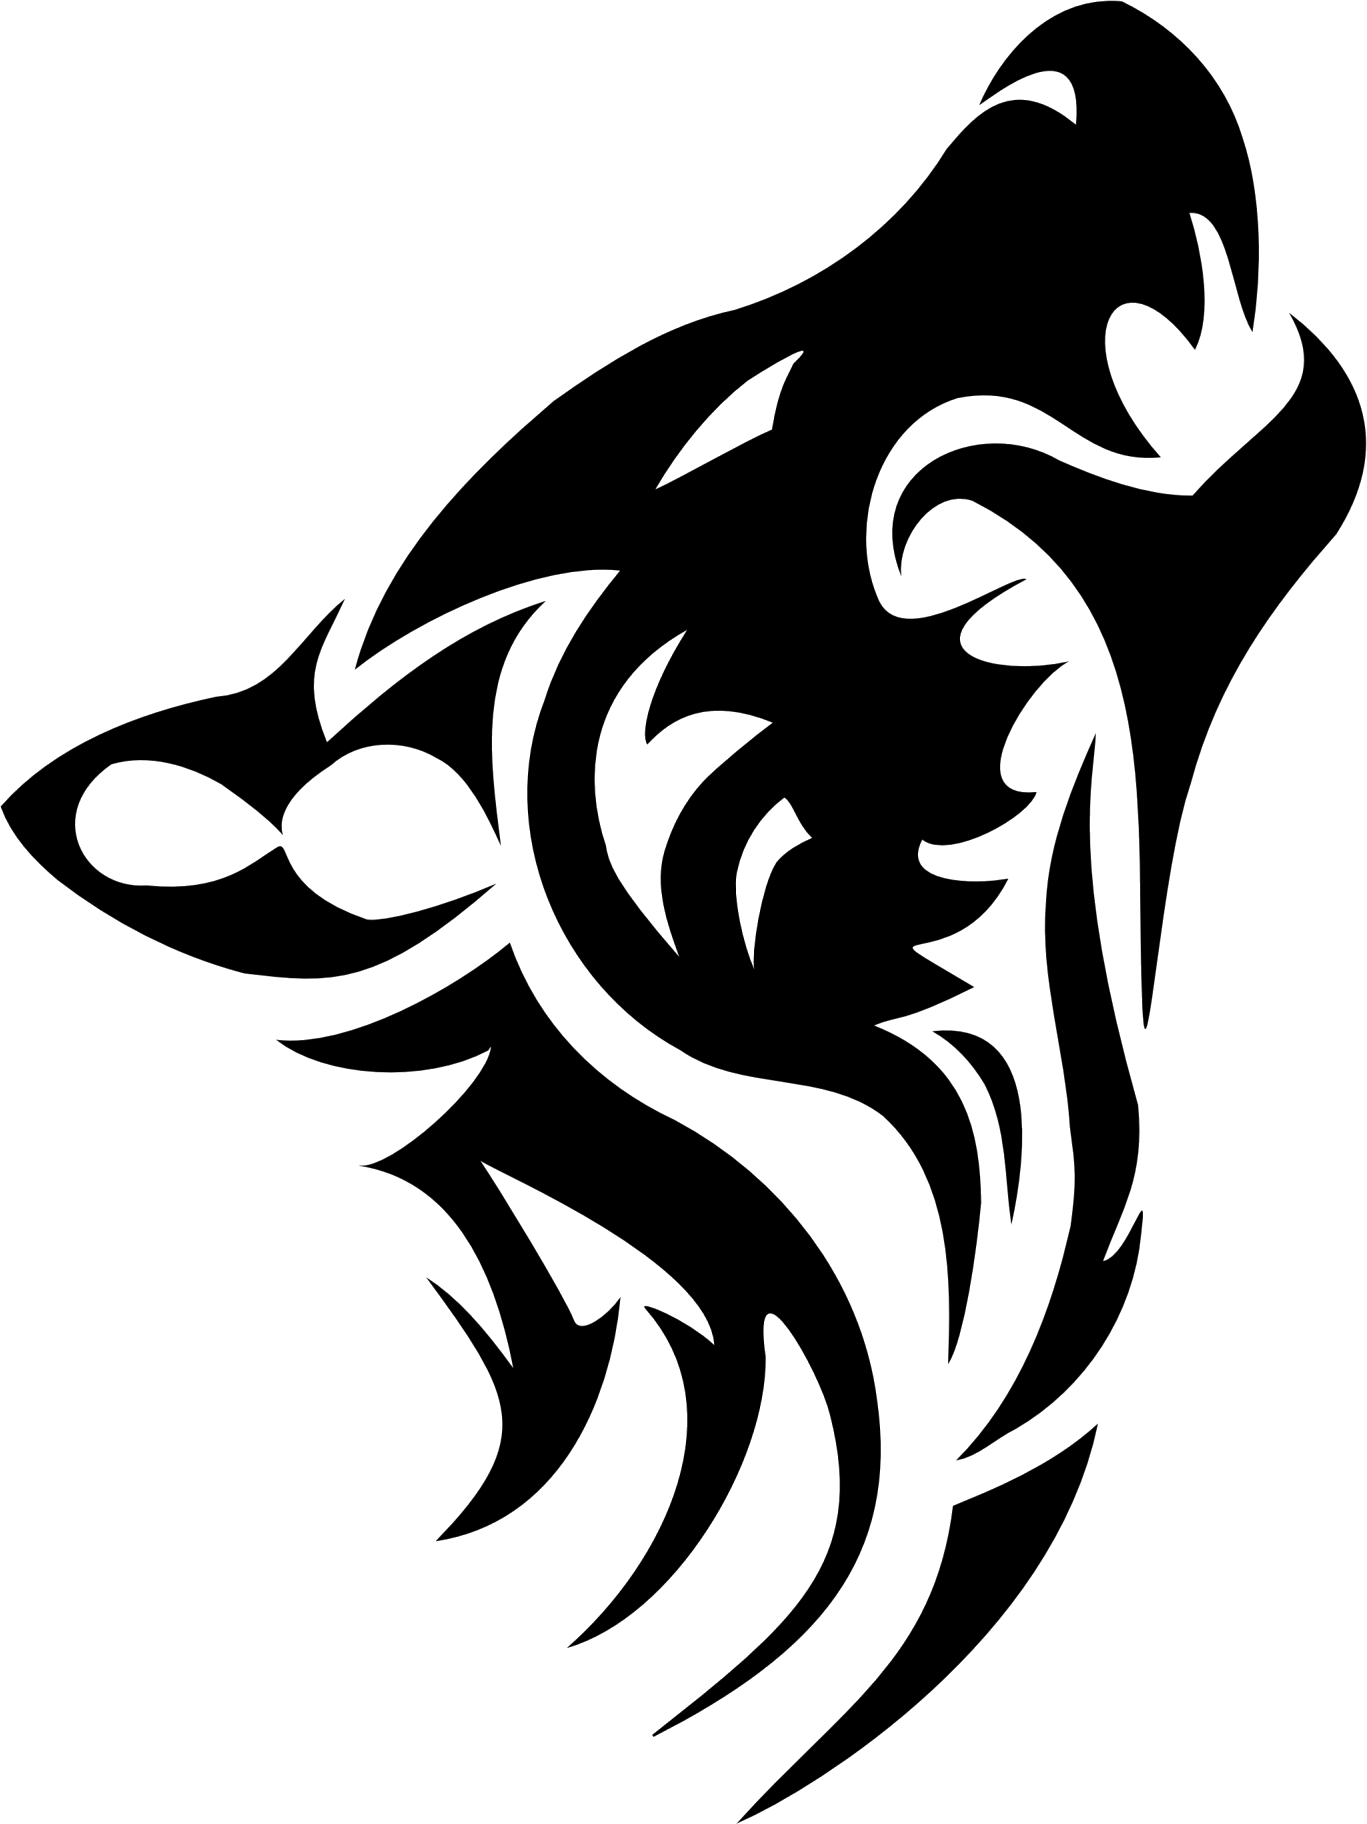 Download PNG image: Tattoo wolf PNG image